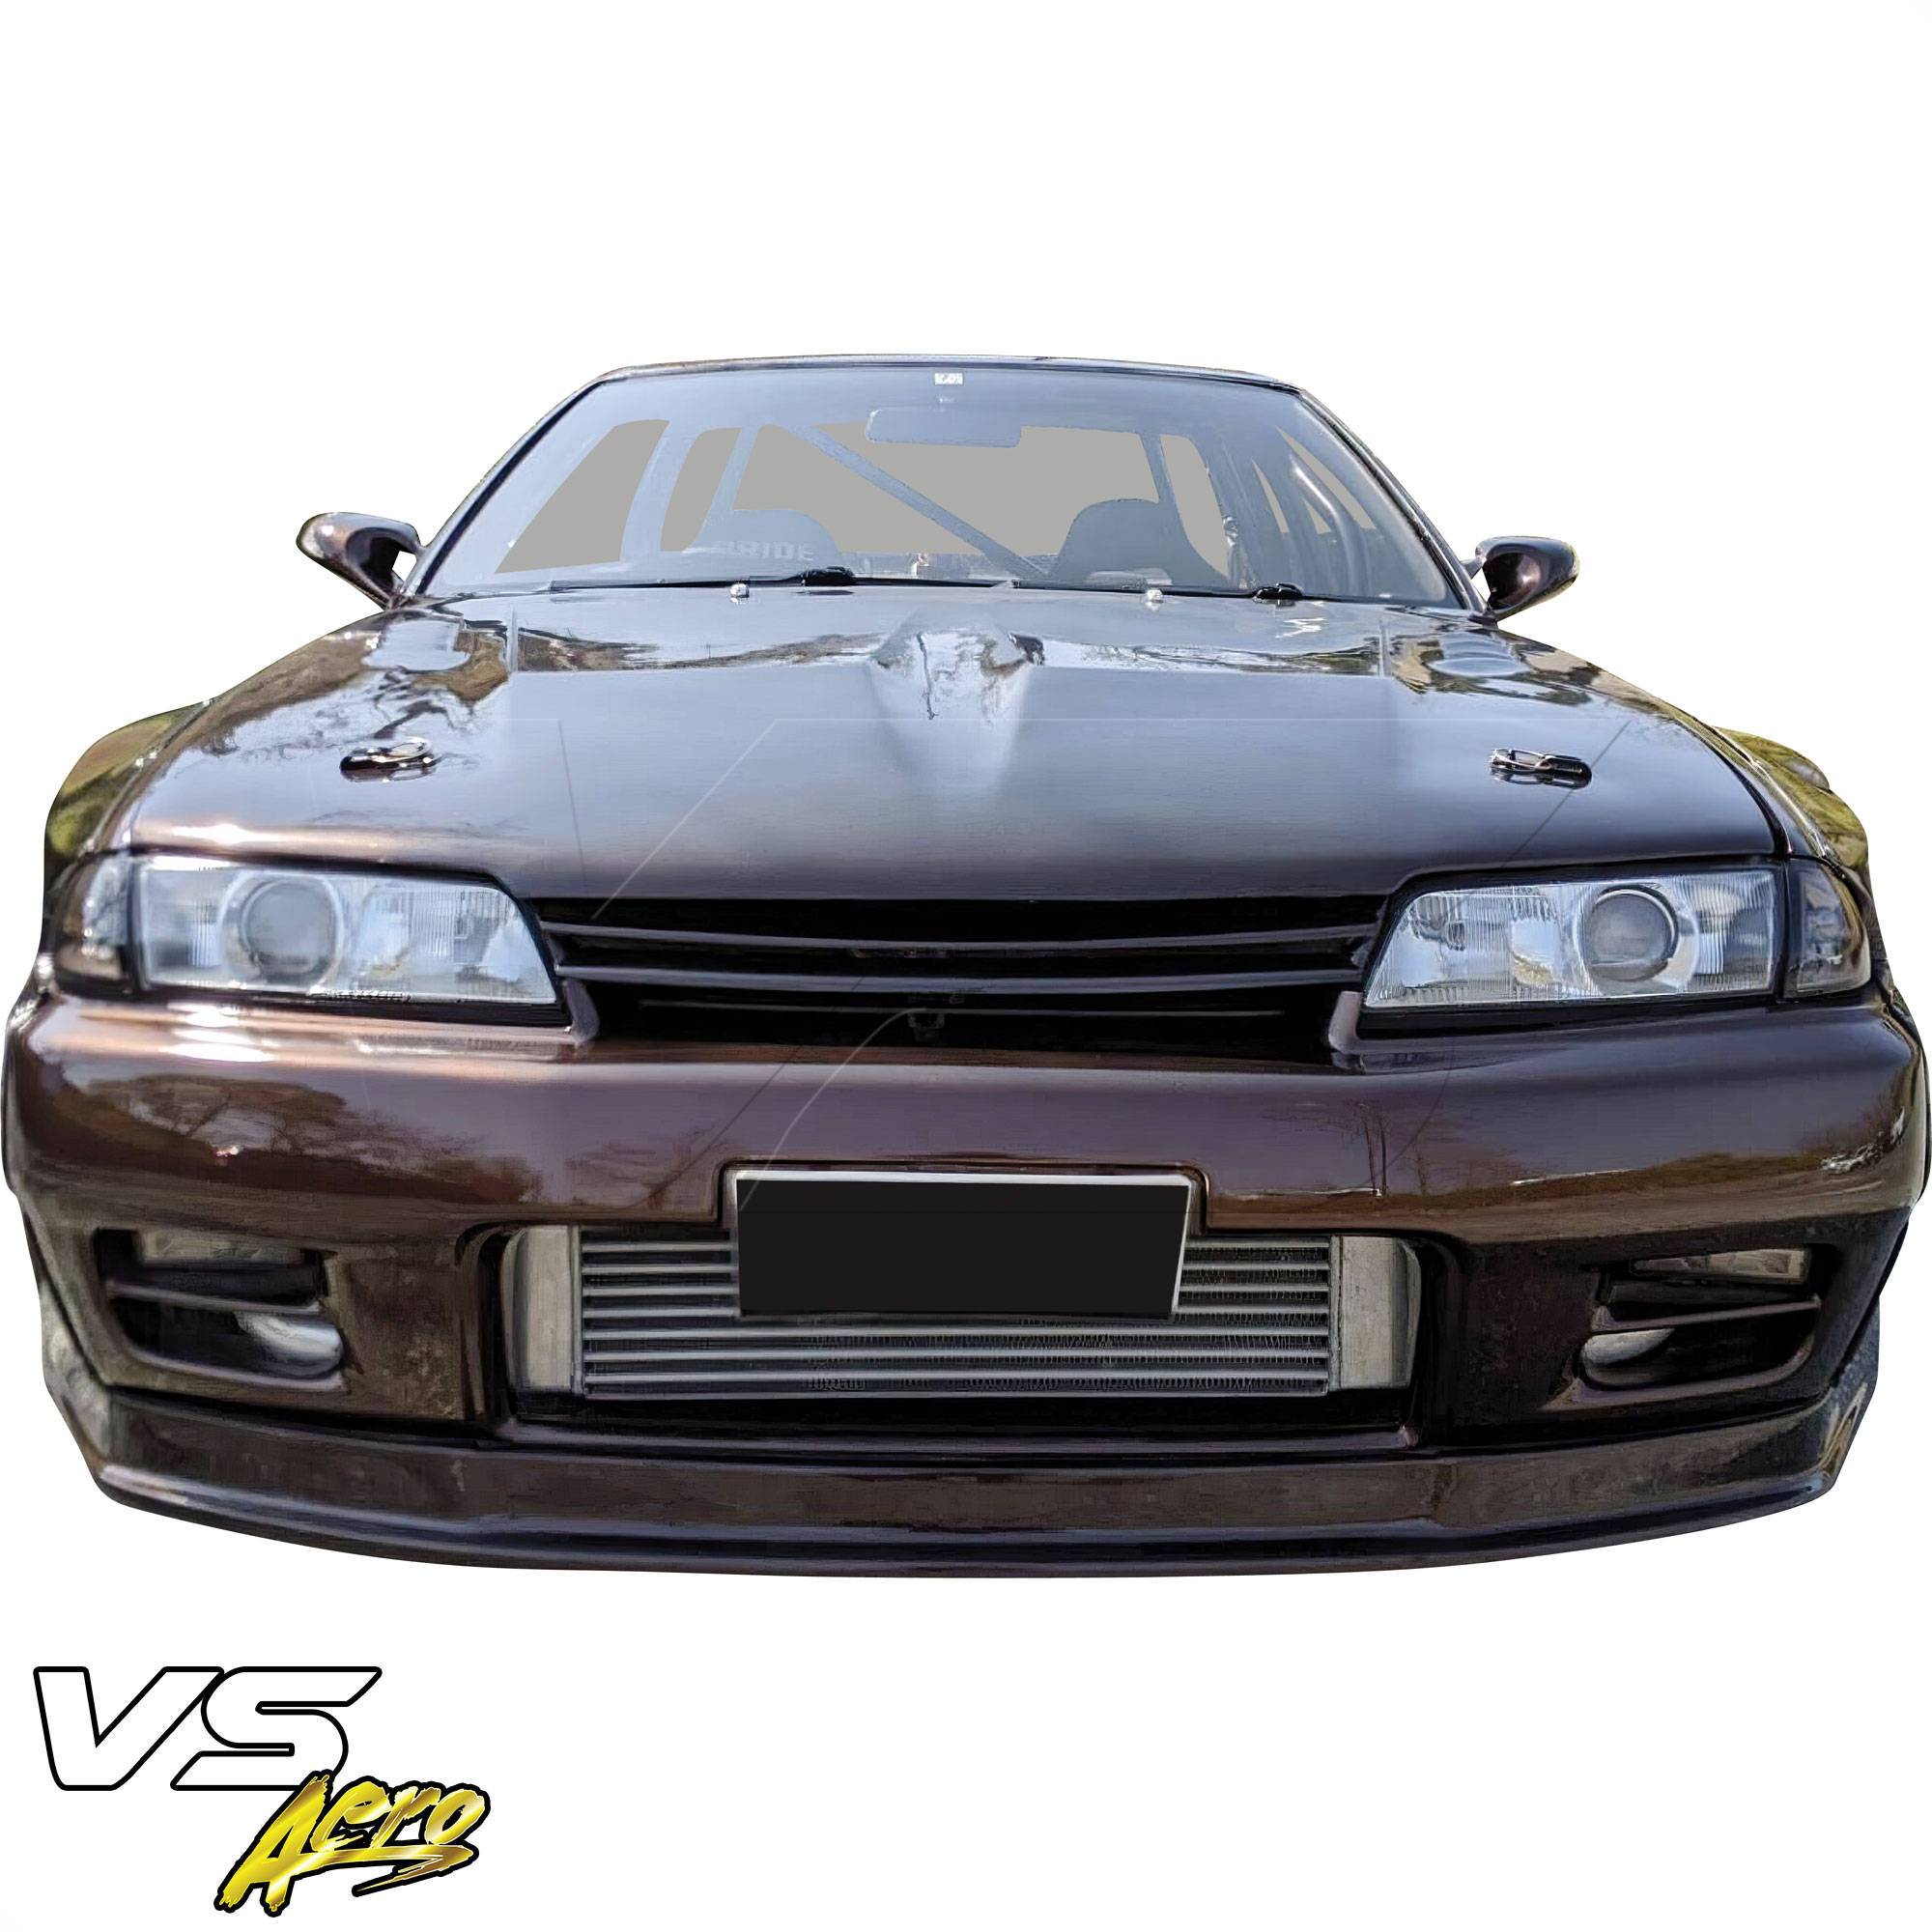 VSaero FRP TKYO Wide Body 40mm Fender Flares (front) 4pc > Nissan Skyline R32 1990-1994 > 2dr Coupe - Image 14